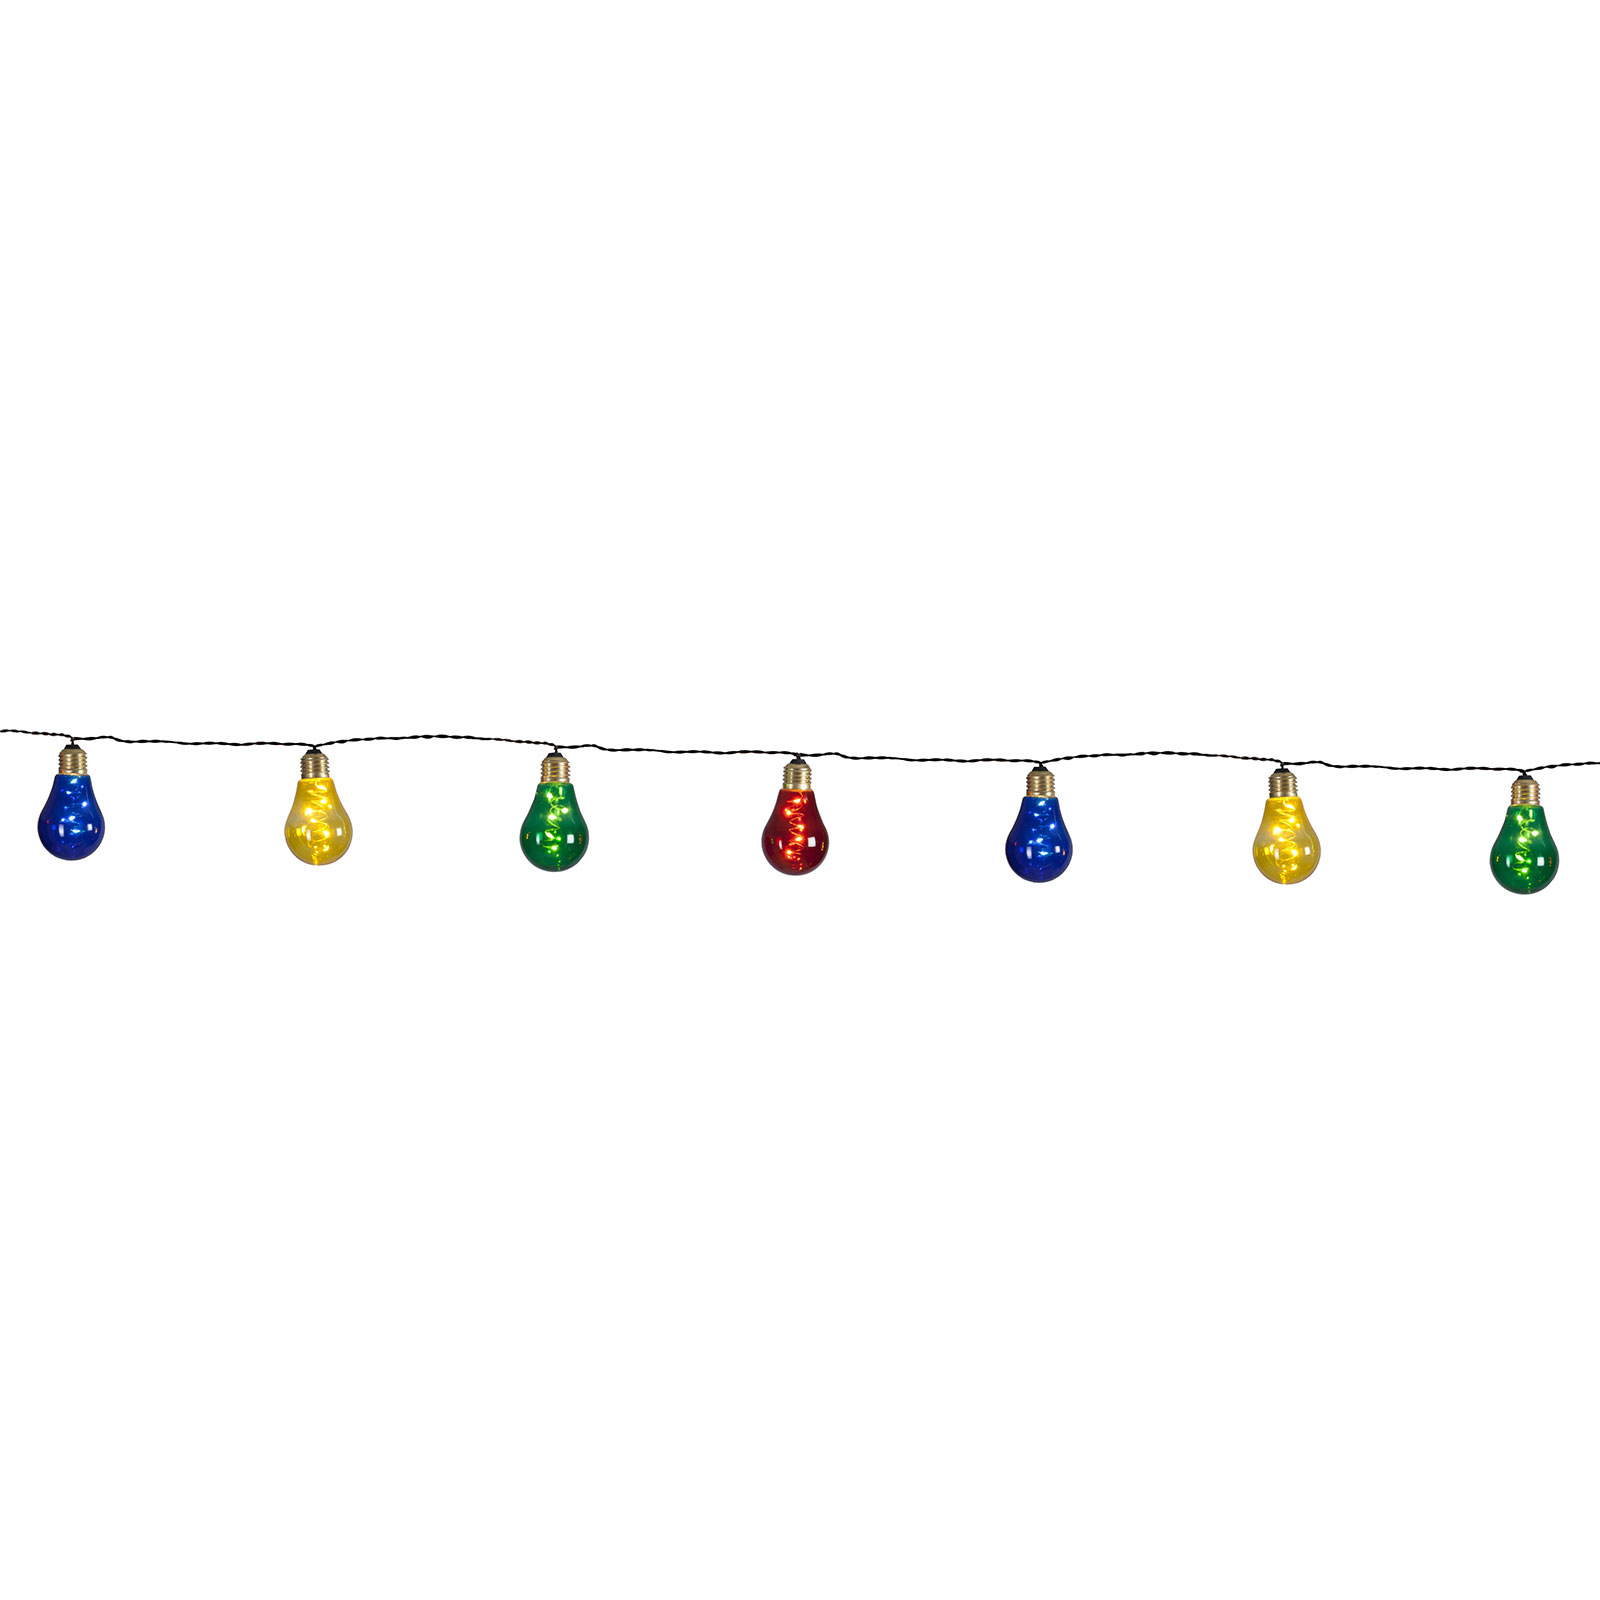 Glow LED string lights, 10 colourful light sources